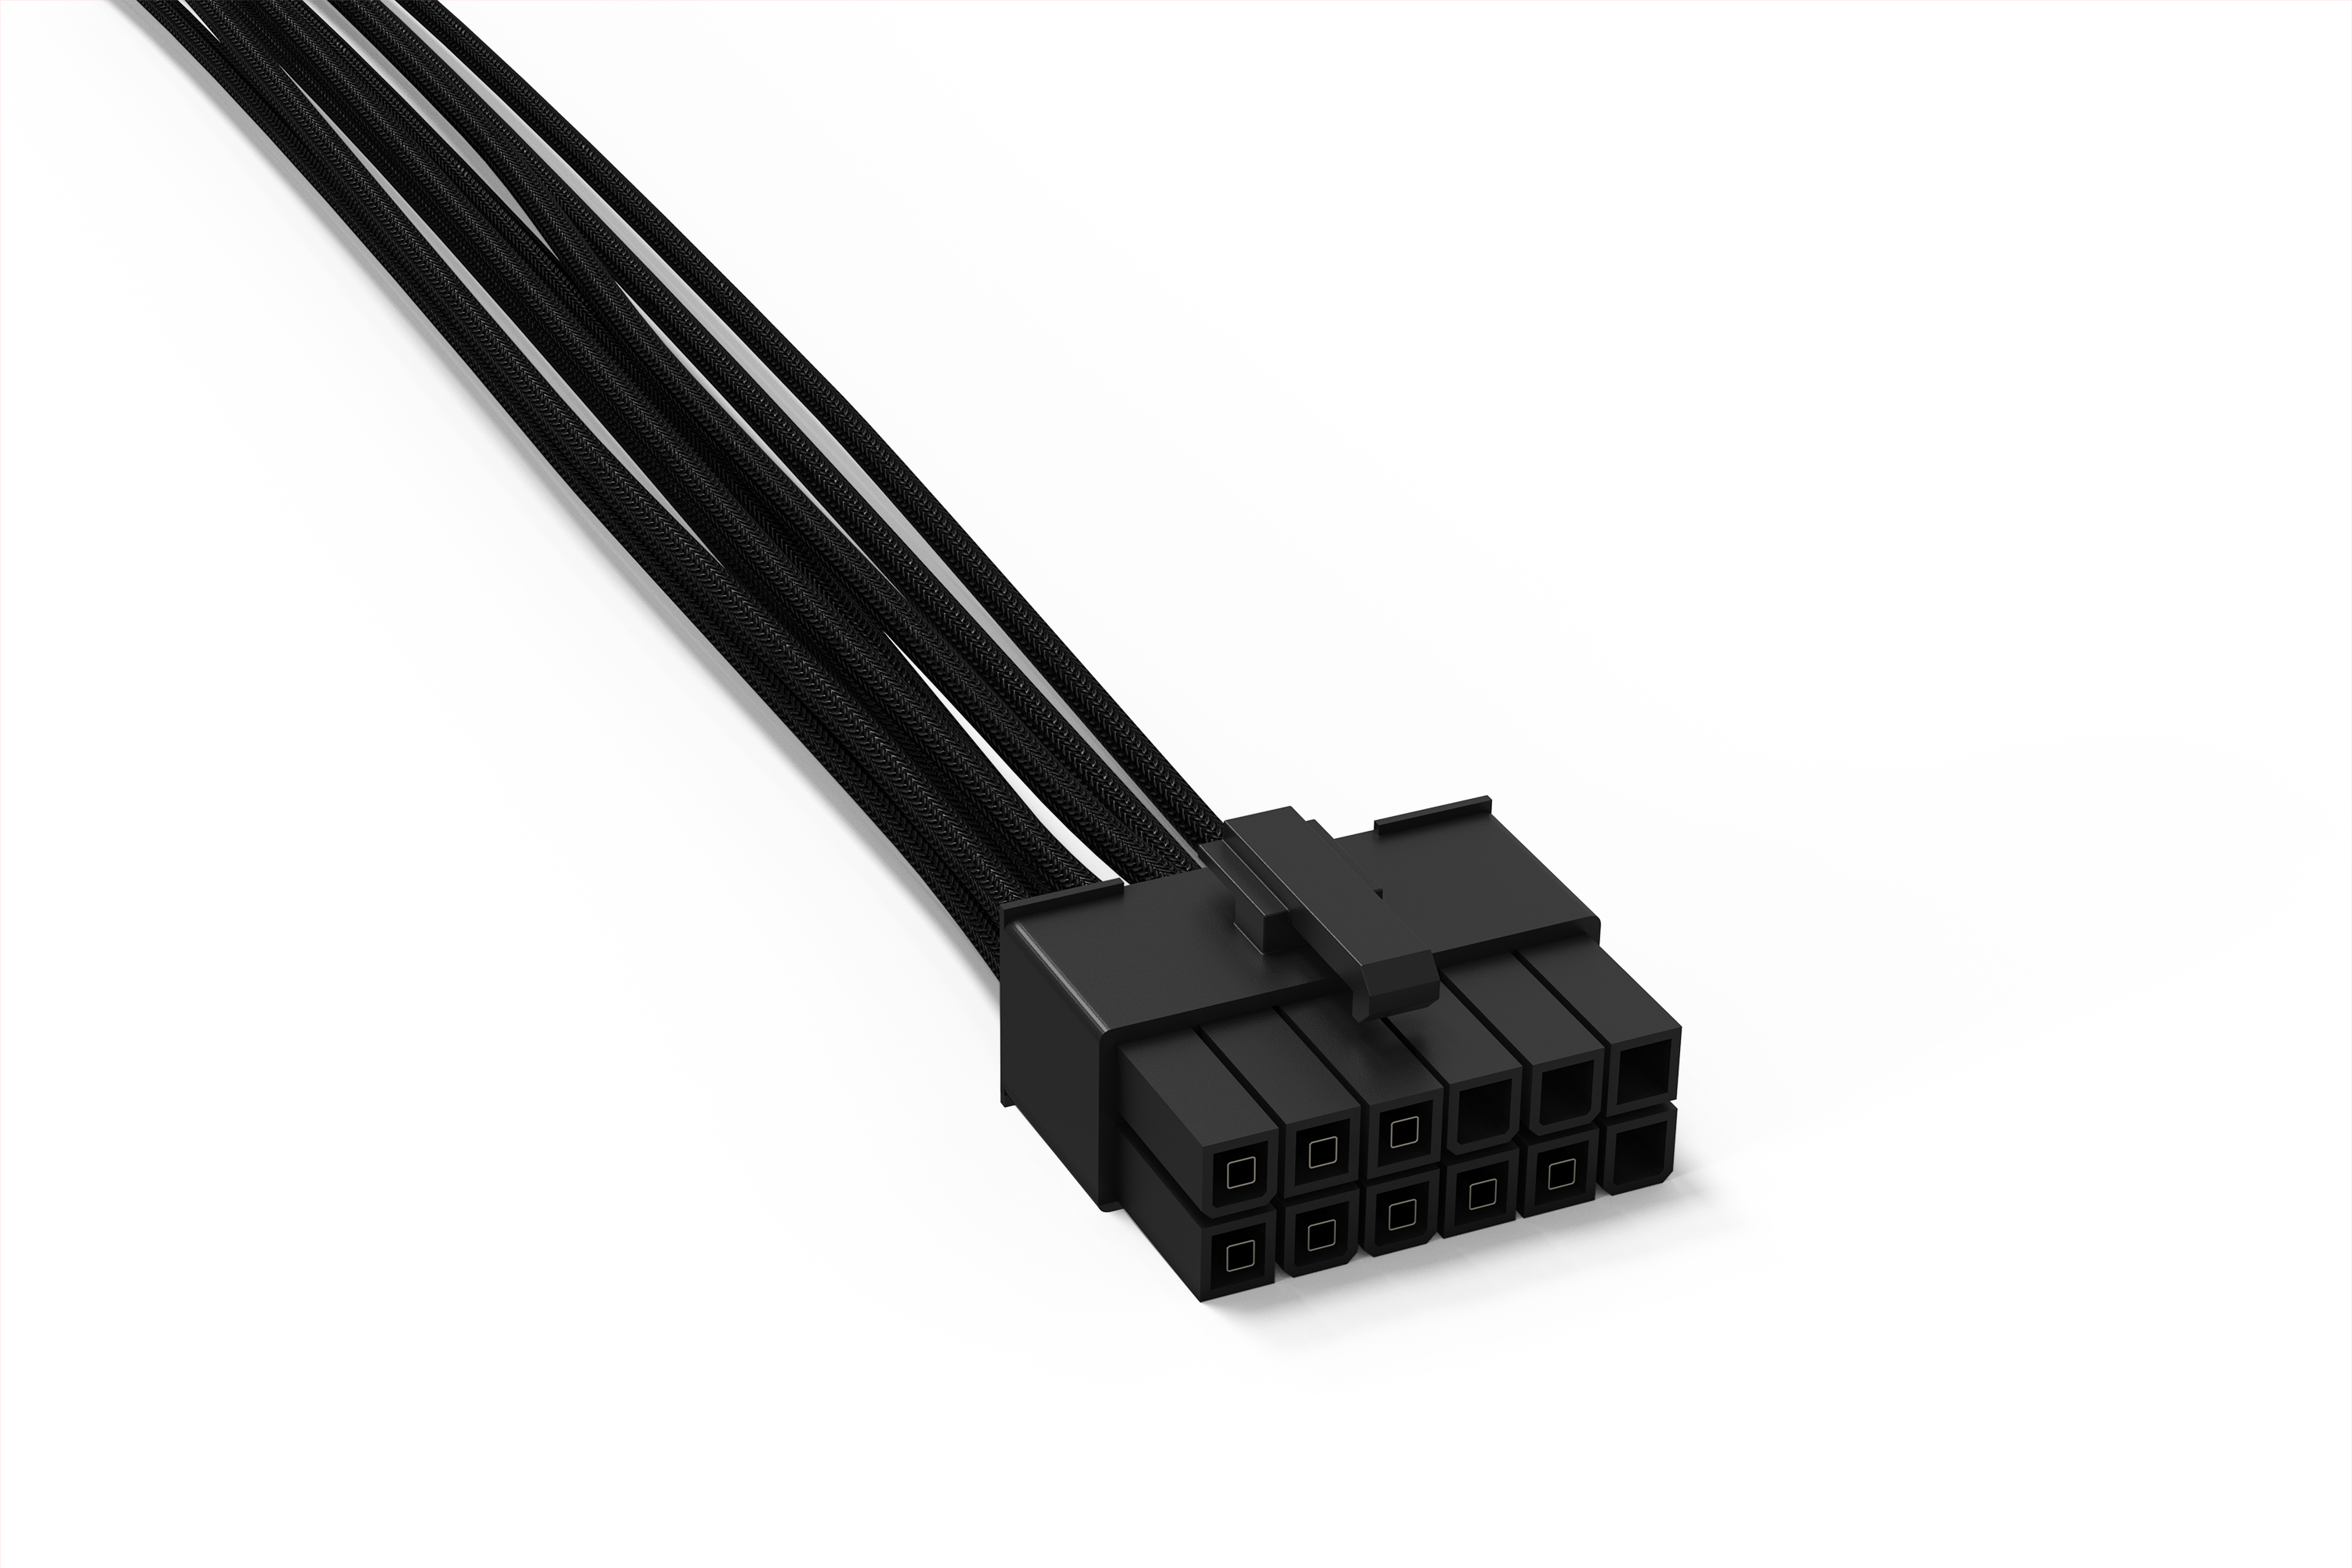 POWER CABLE | CS-6610 from be quiet!